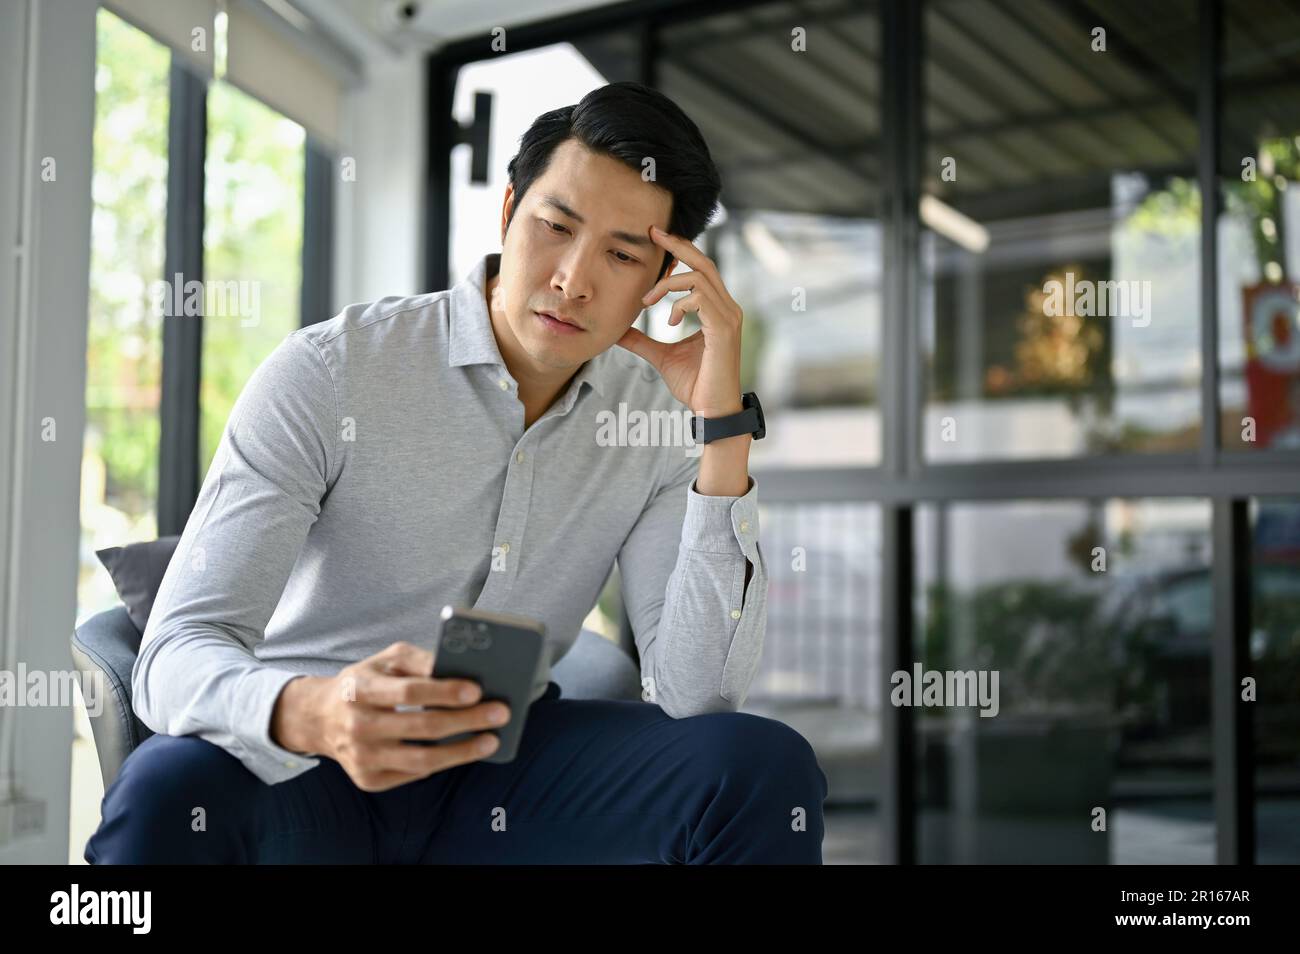 Stressed and thoughtful millennial Asian businessman or male boss reading messages on his smartphone while sitting in his office. Stock Photo